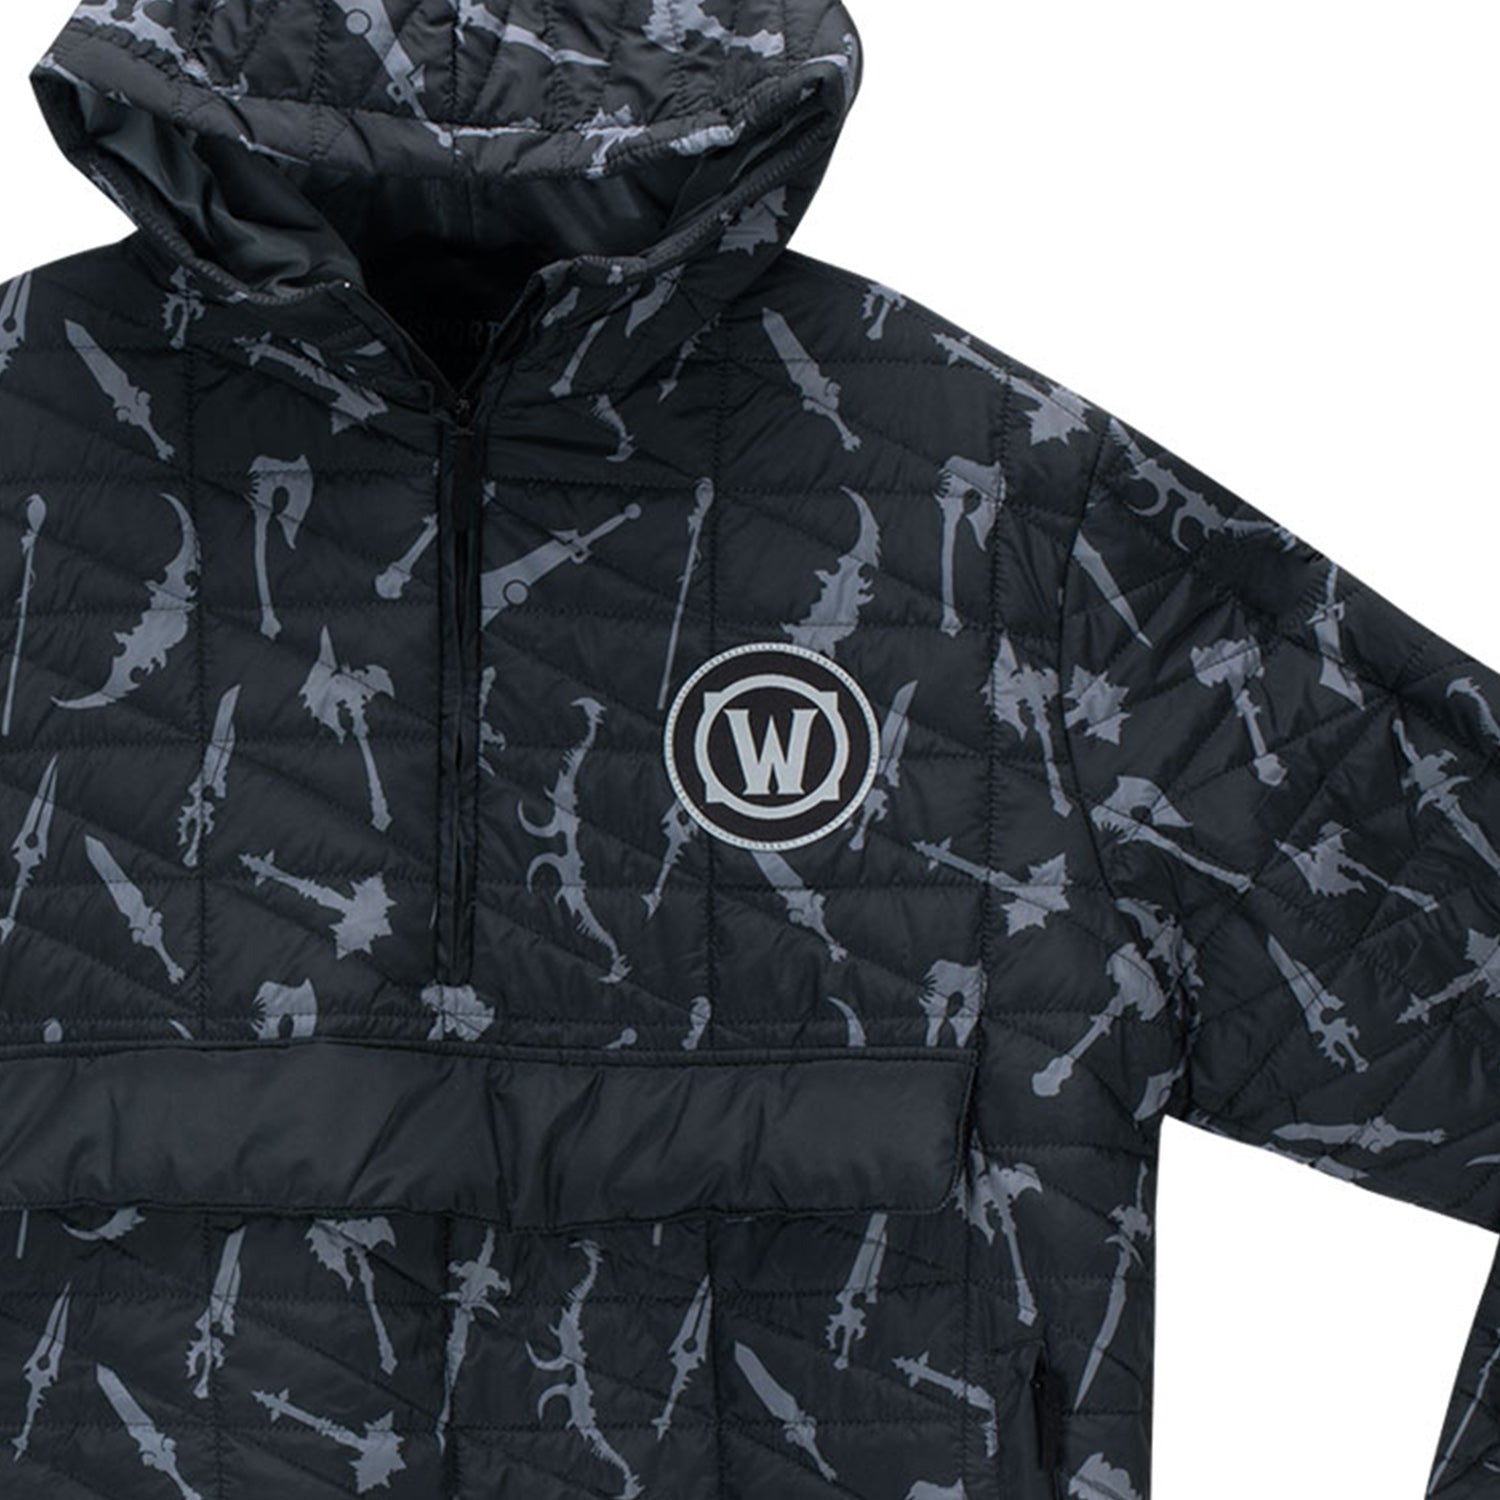 World of Warcraft Weapons Half-Zip Pullover Jacket - Close Up View